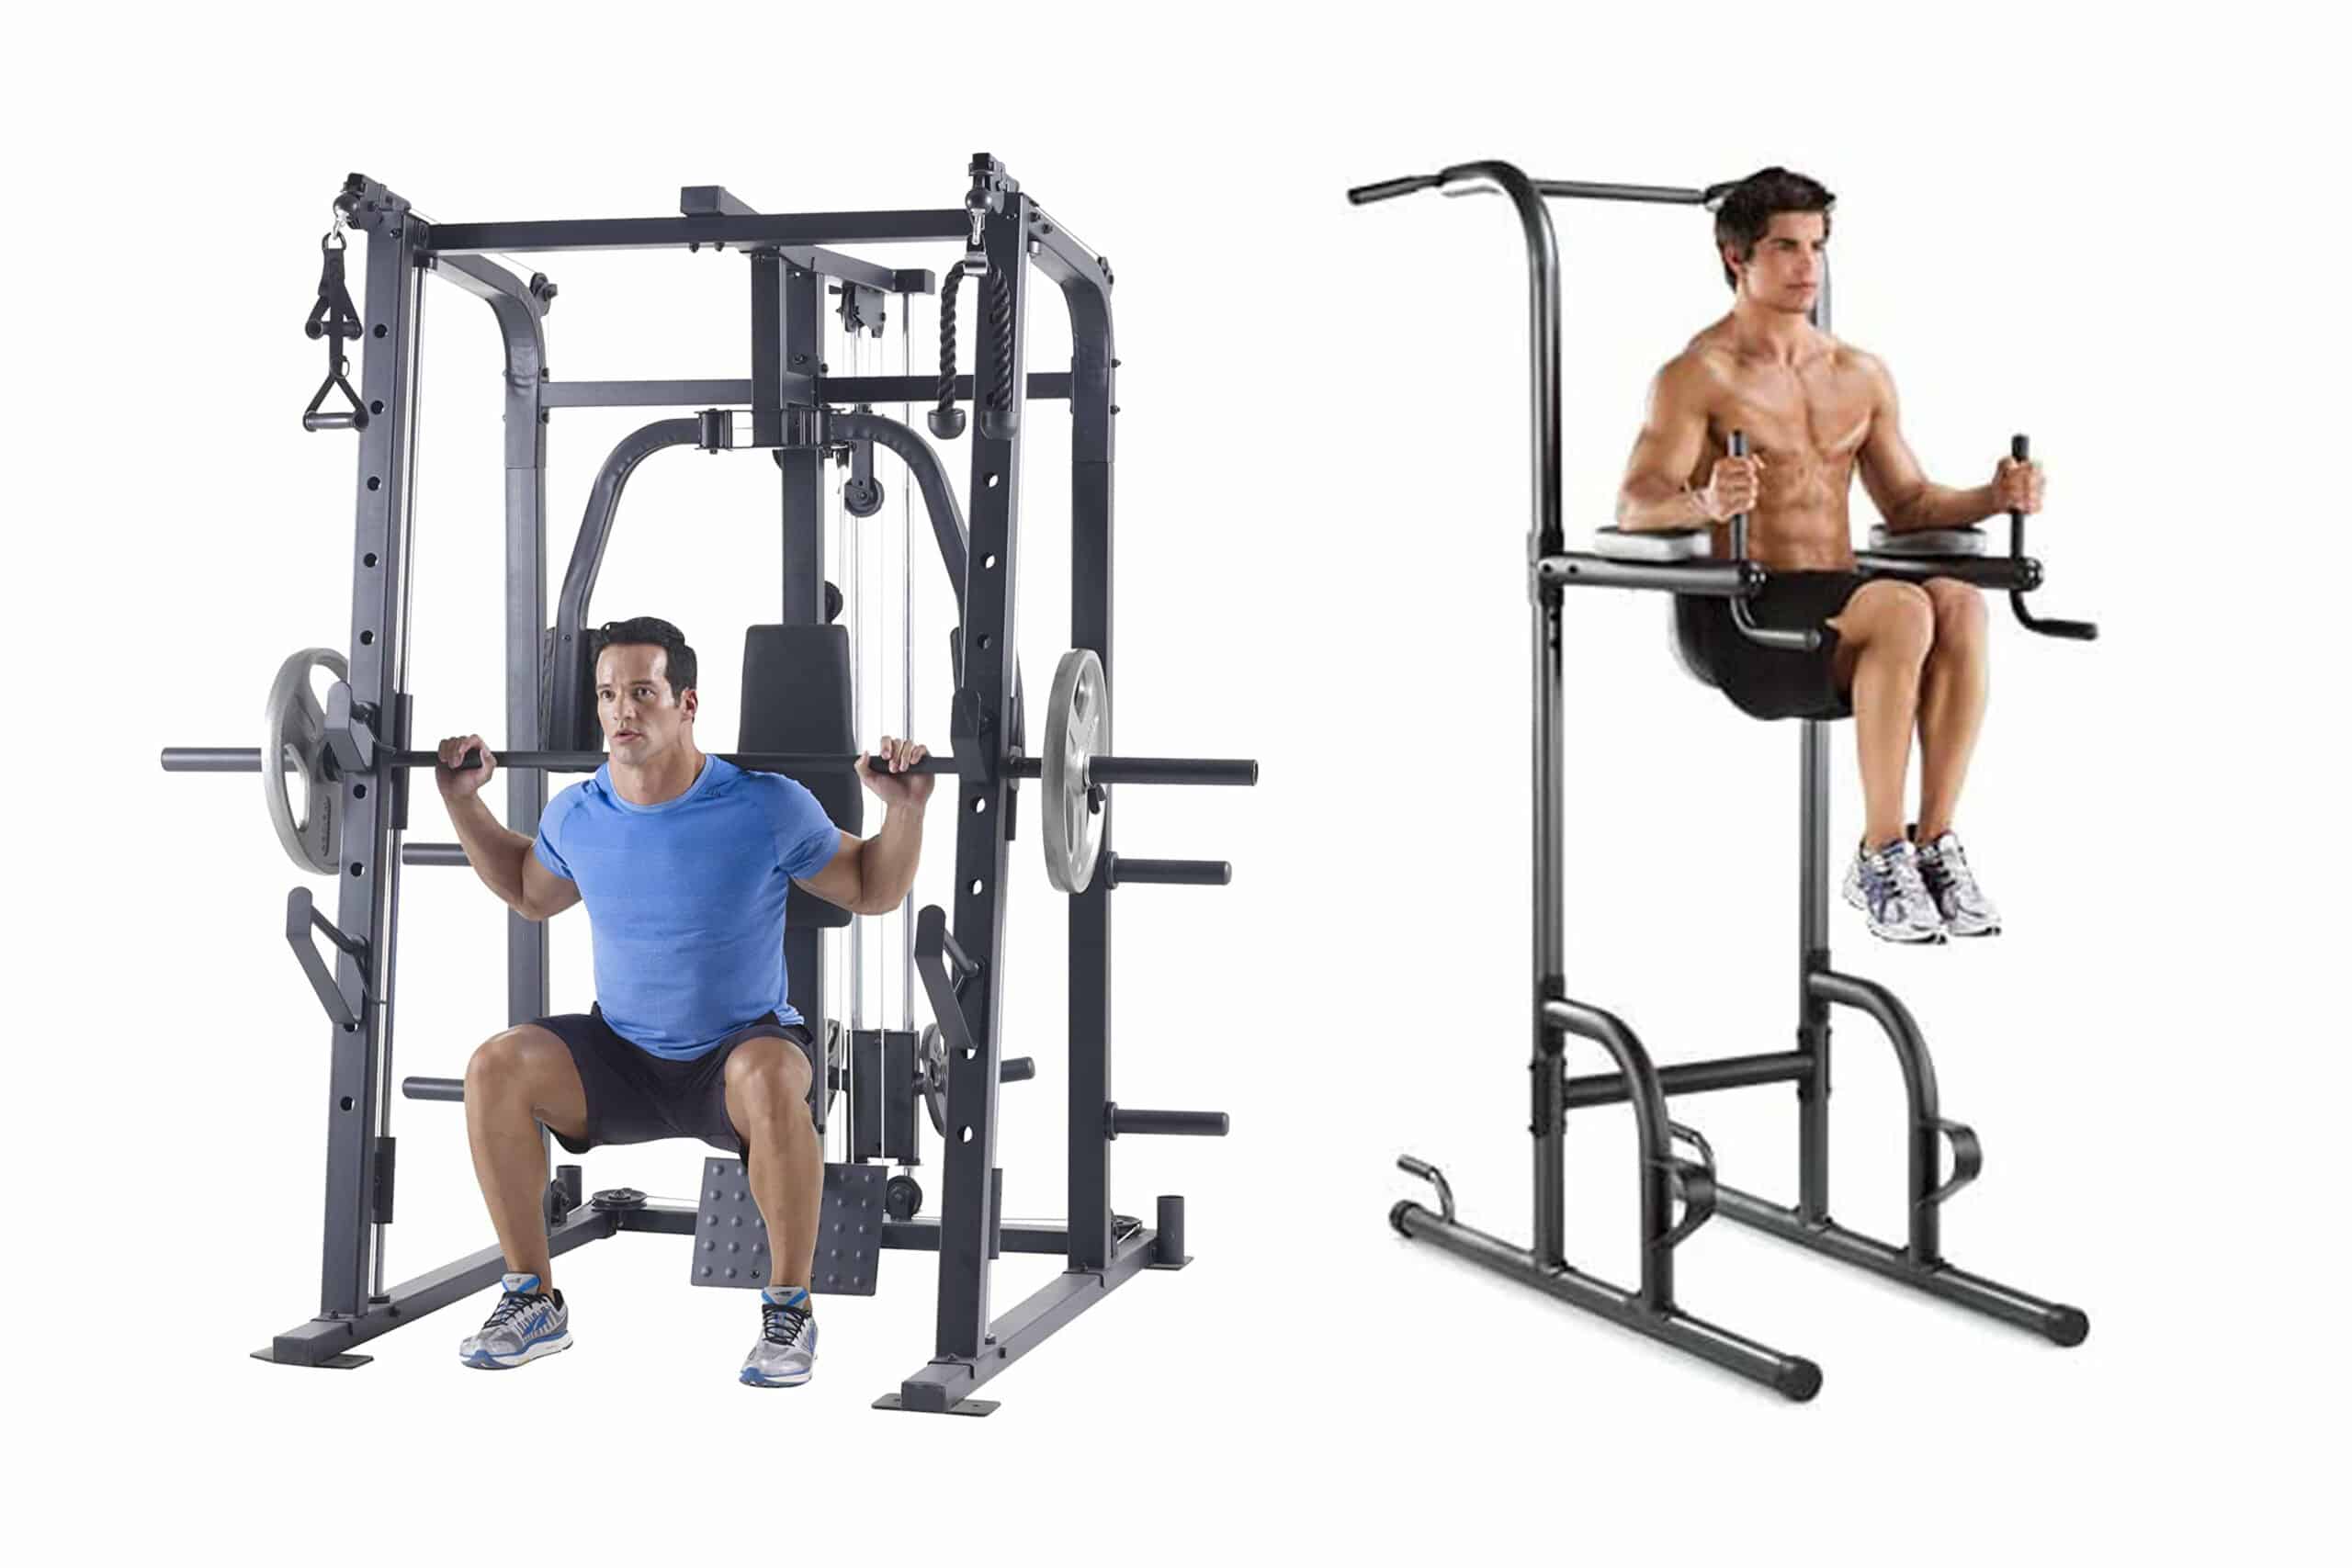 Compliment hobby sleuf 5 Best Joe Weider Home Gyms + Buying Guide (2022)